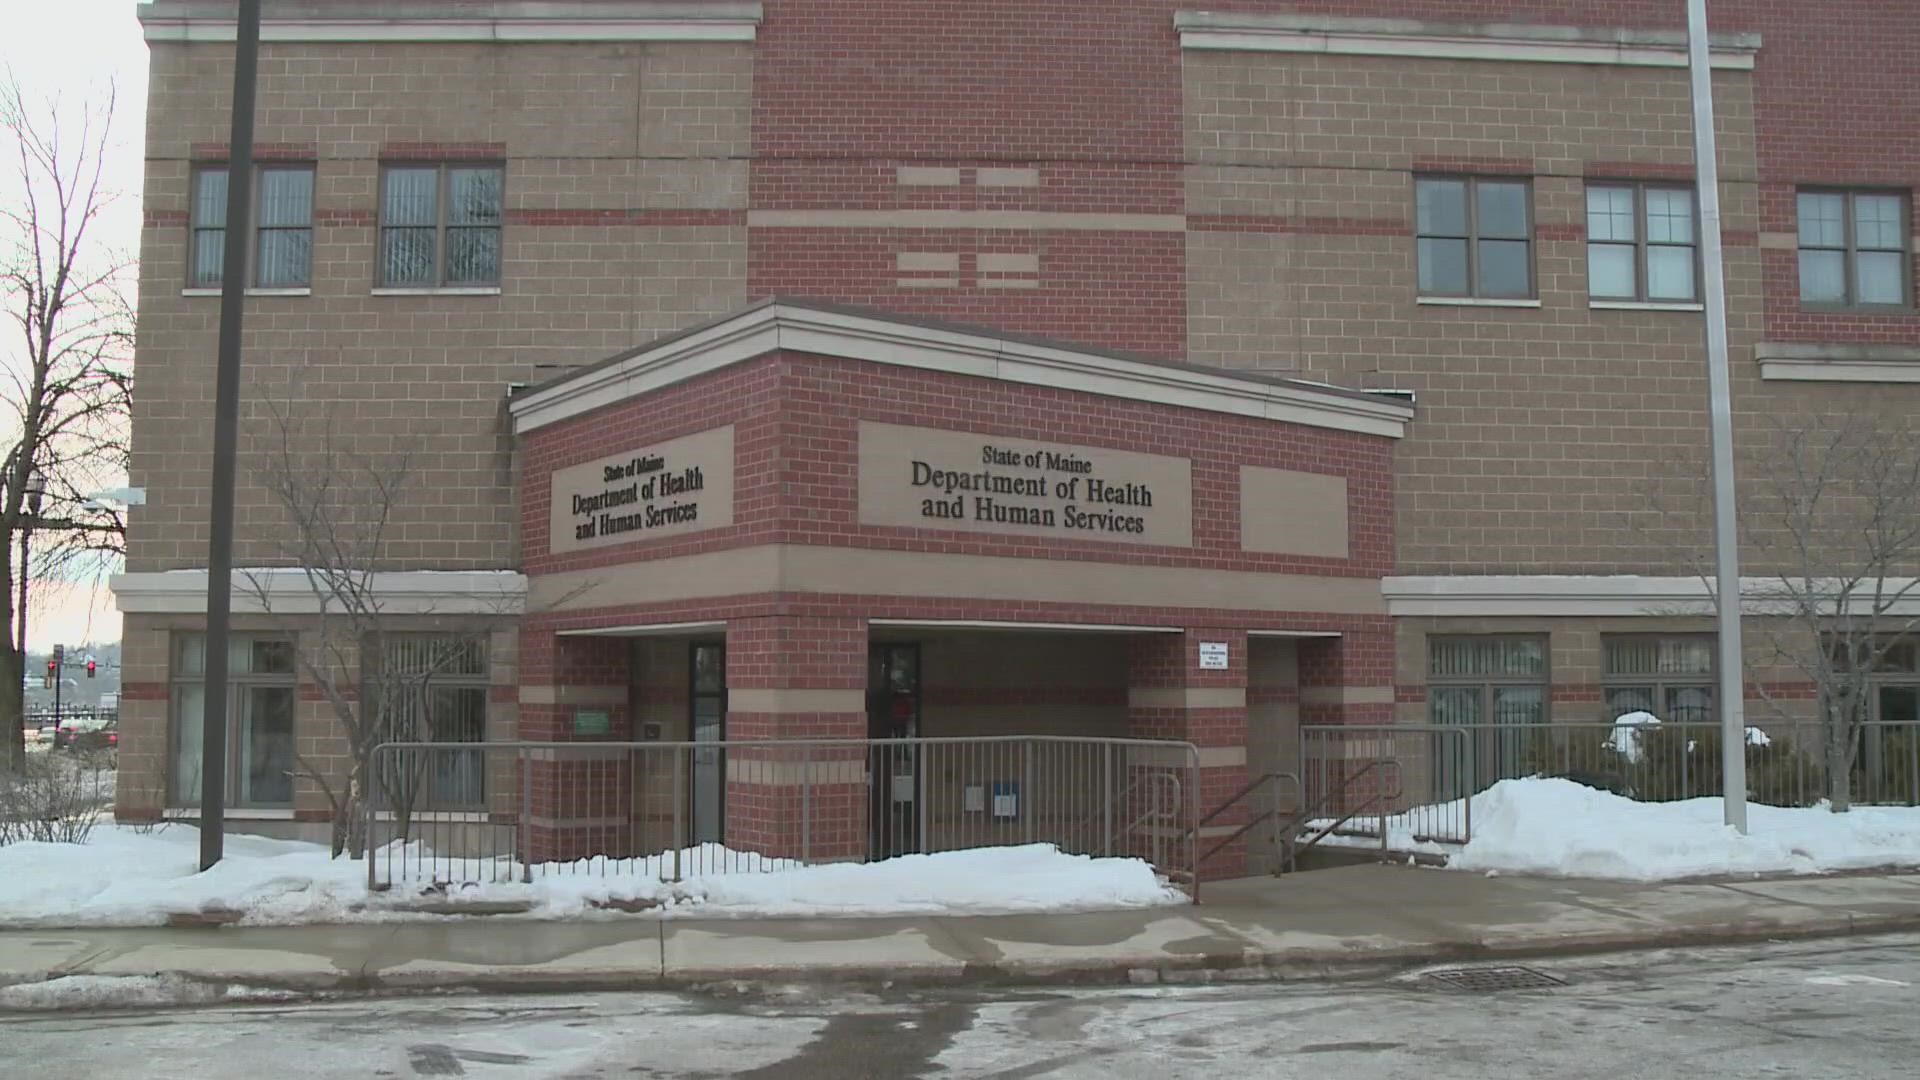 The Maine Department of Health and Human Services is closed due to electrical damage from the extreme cold snap but has plans to reopen soon.